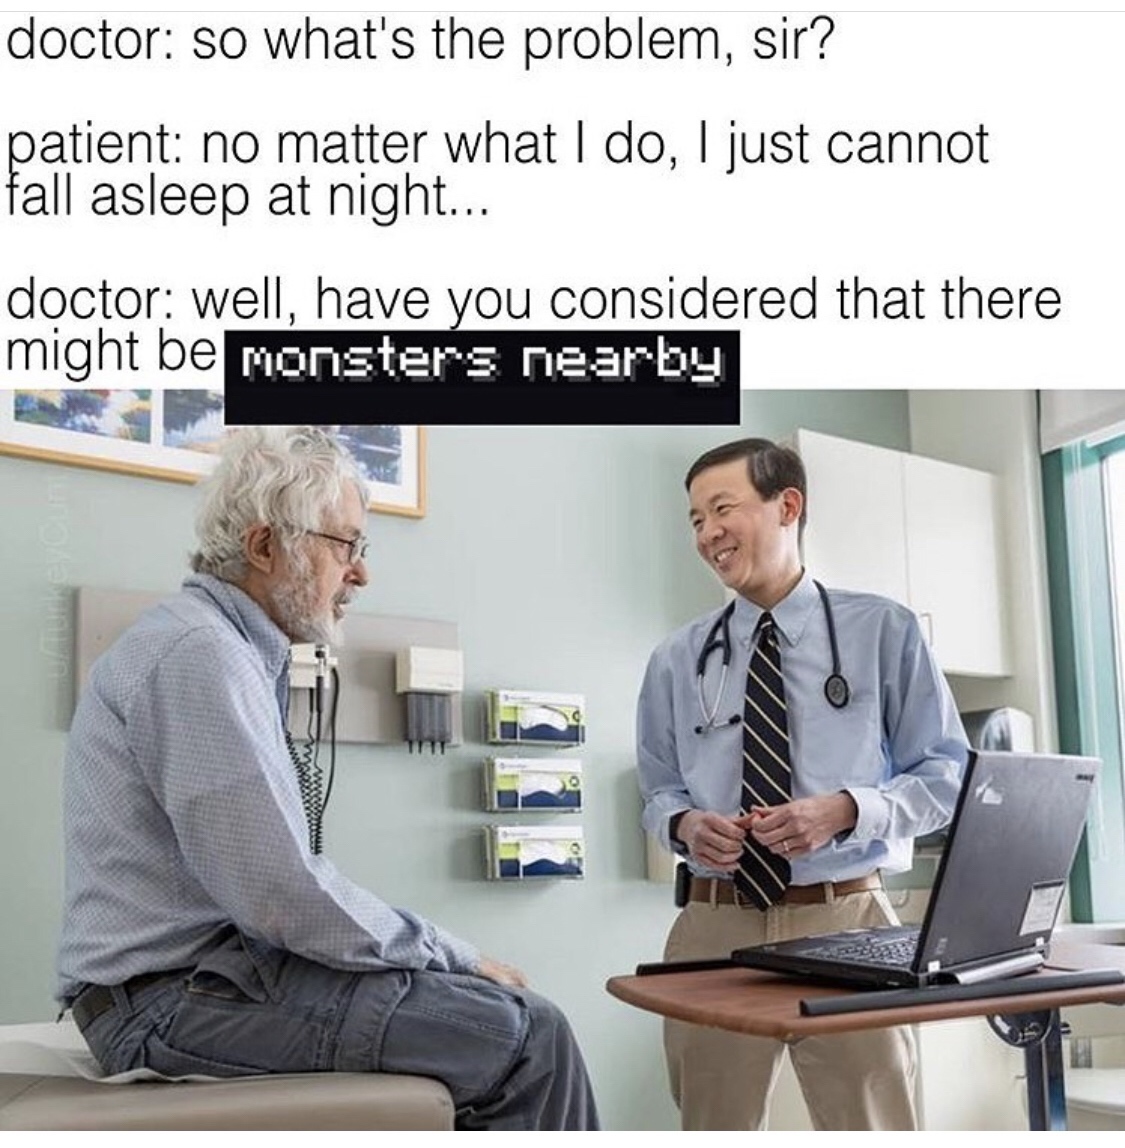 Sleep - doctor so what's the problem, sir? patient no matter what I do, I just cannot fall asleep at night... doctor well, have you considered that there might be monsters nearby